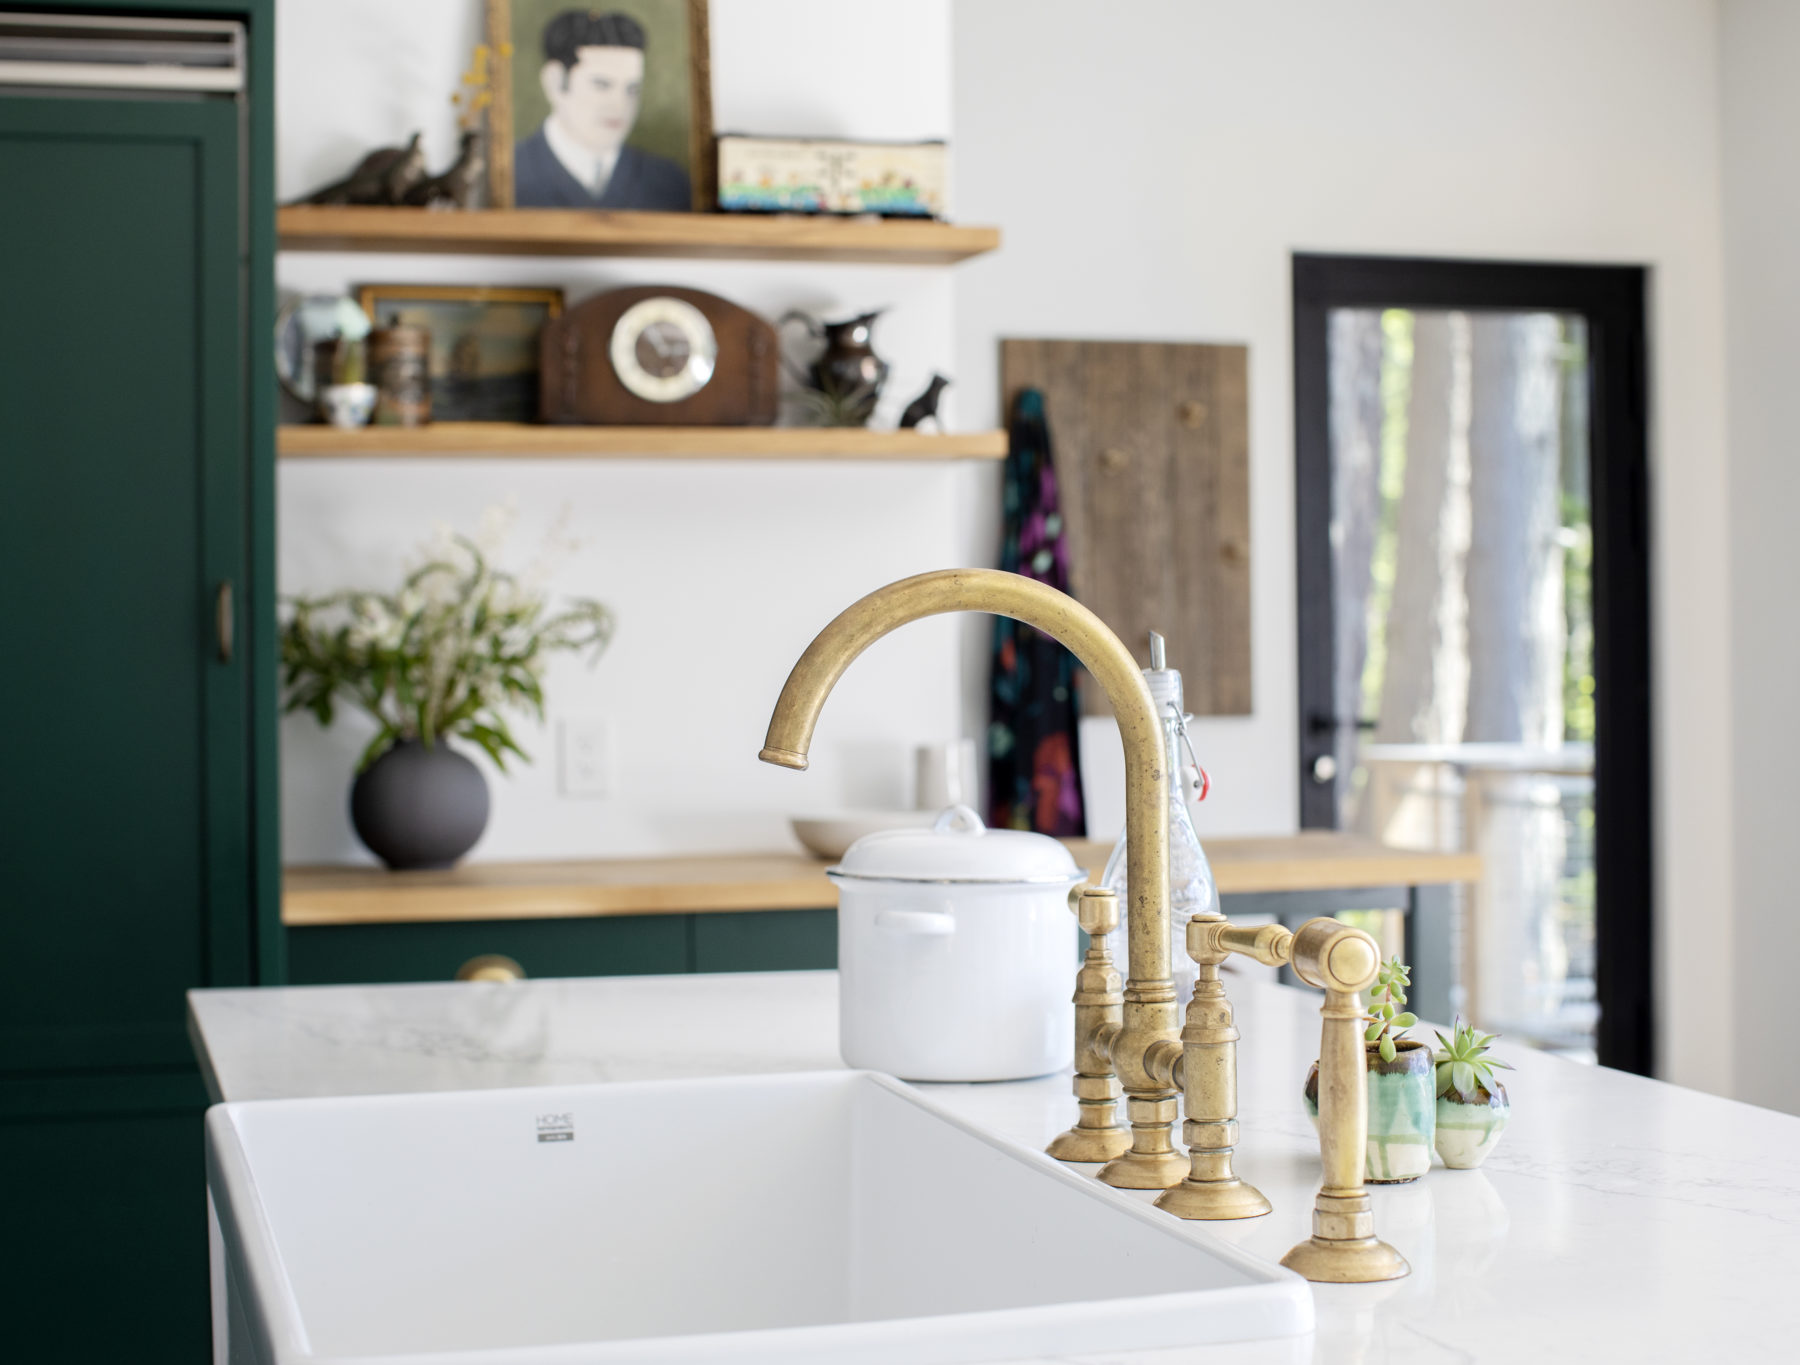 Brass kitchen taps with white sink. Brand new home construction